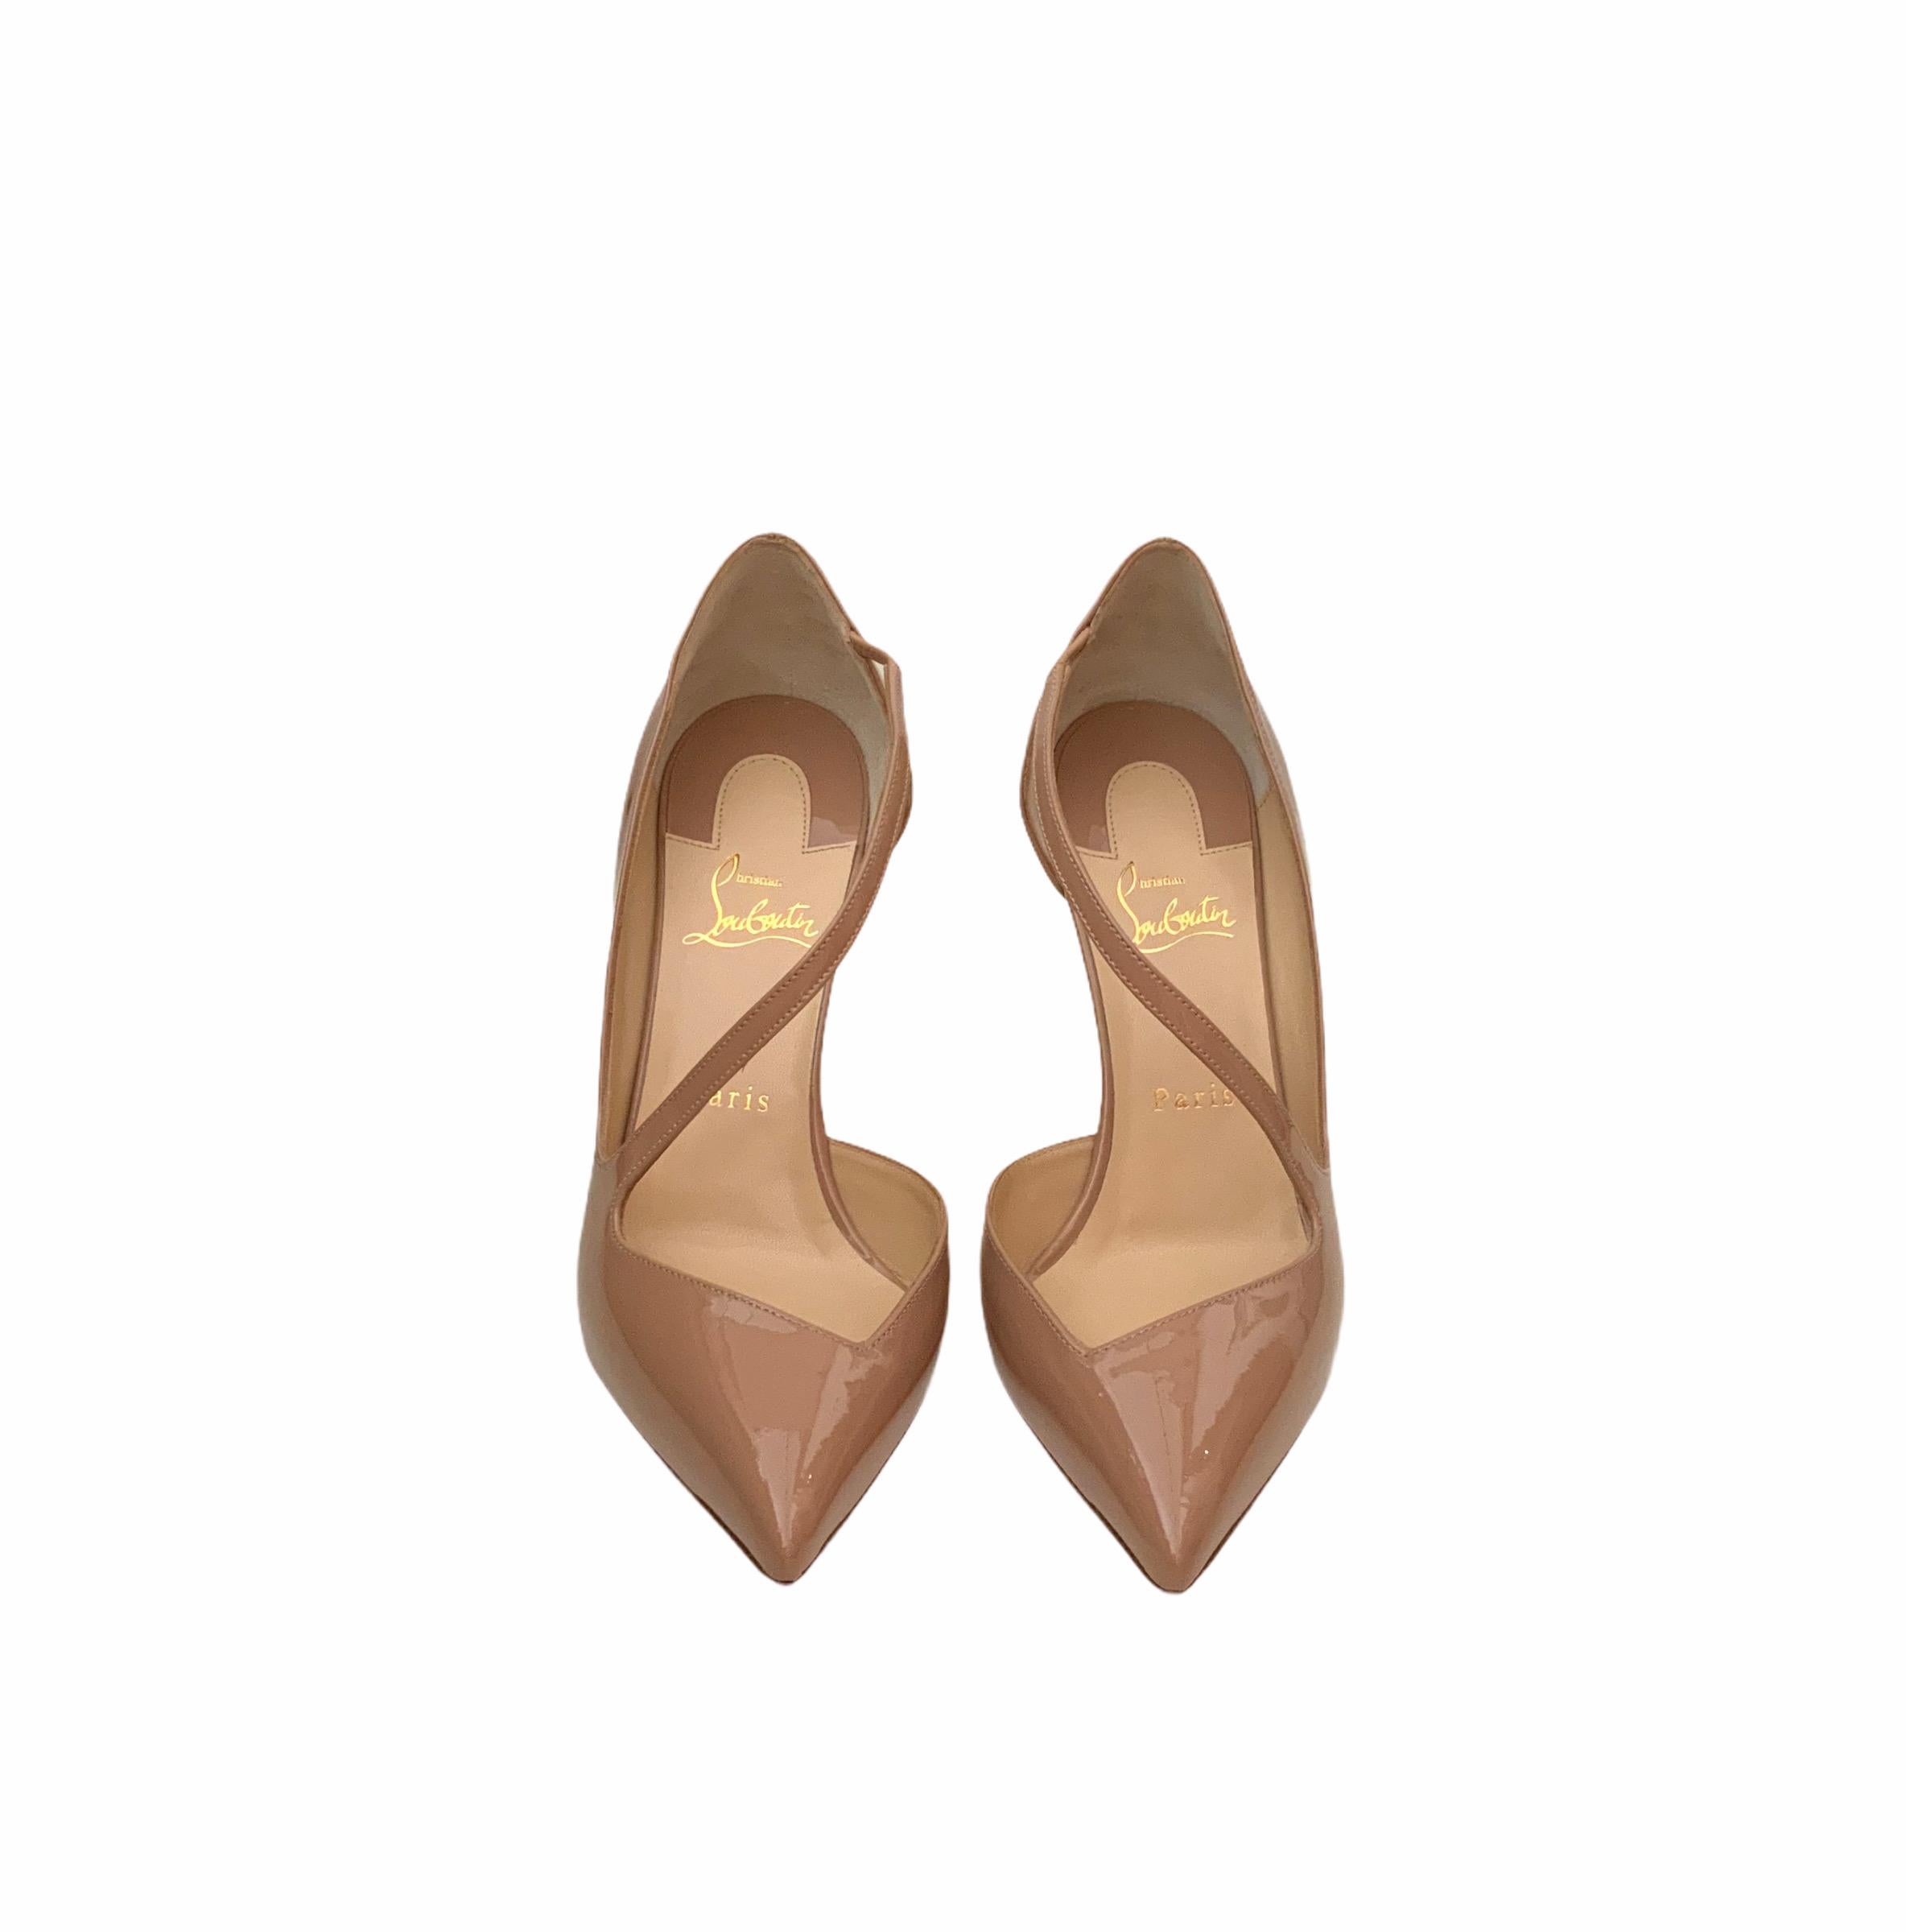 Lovely pre-owned but new attached strap adorns glossy nude patent leather point-toe pumps from the house of Christian Louboutin.

Material: Patent leather
Sole: leather
Color: nude
Measurements: Heel height: 8.5cm - approx. 3